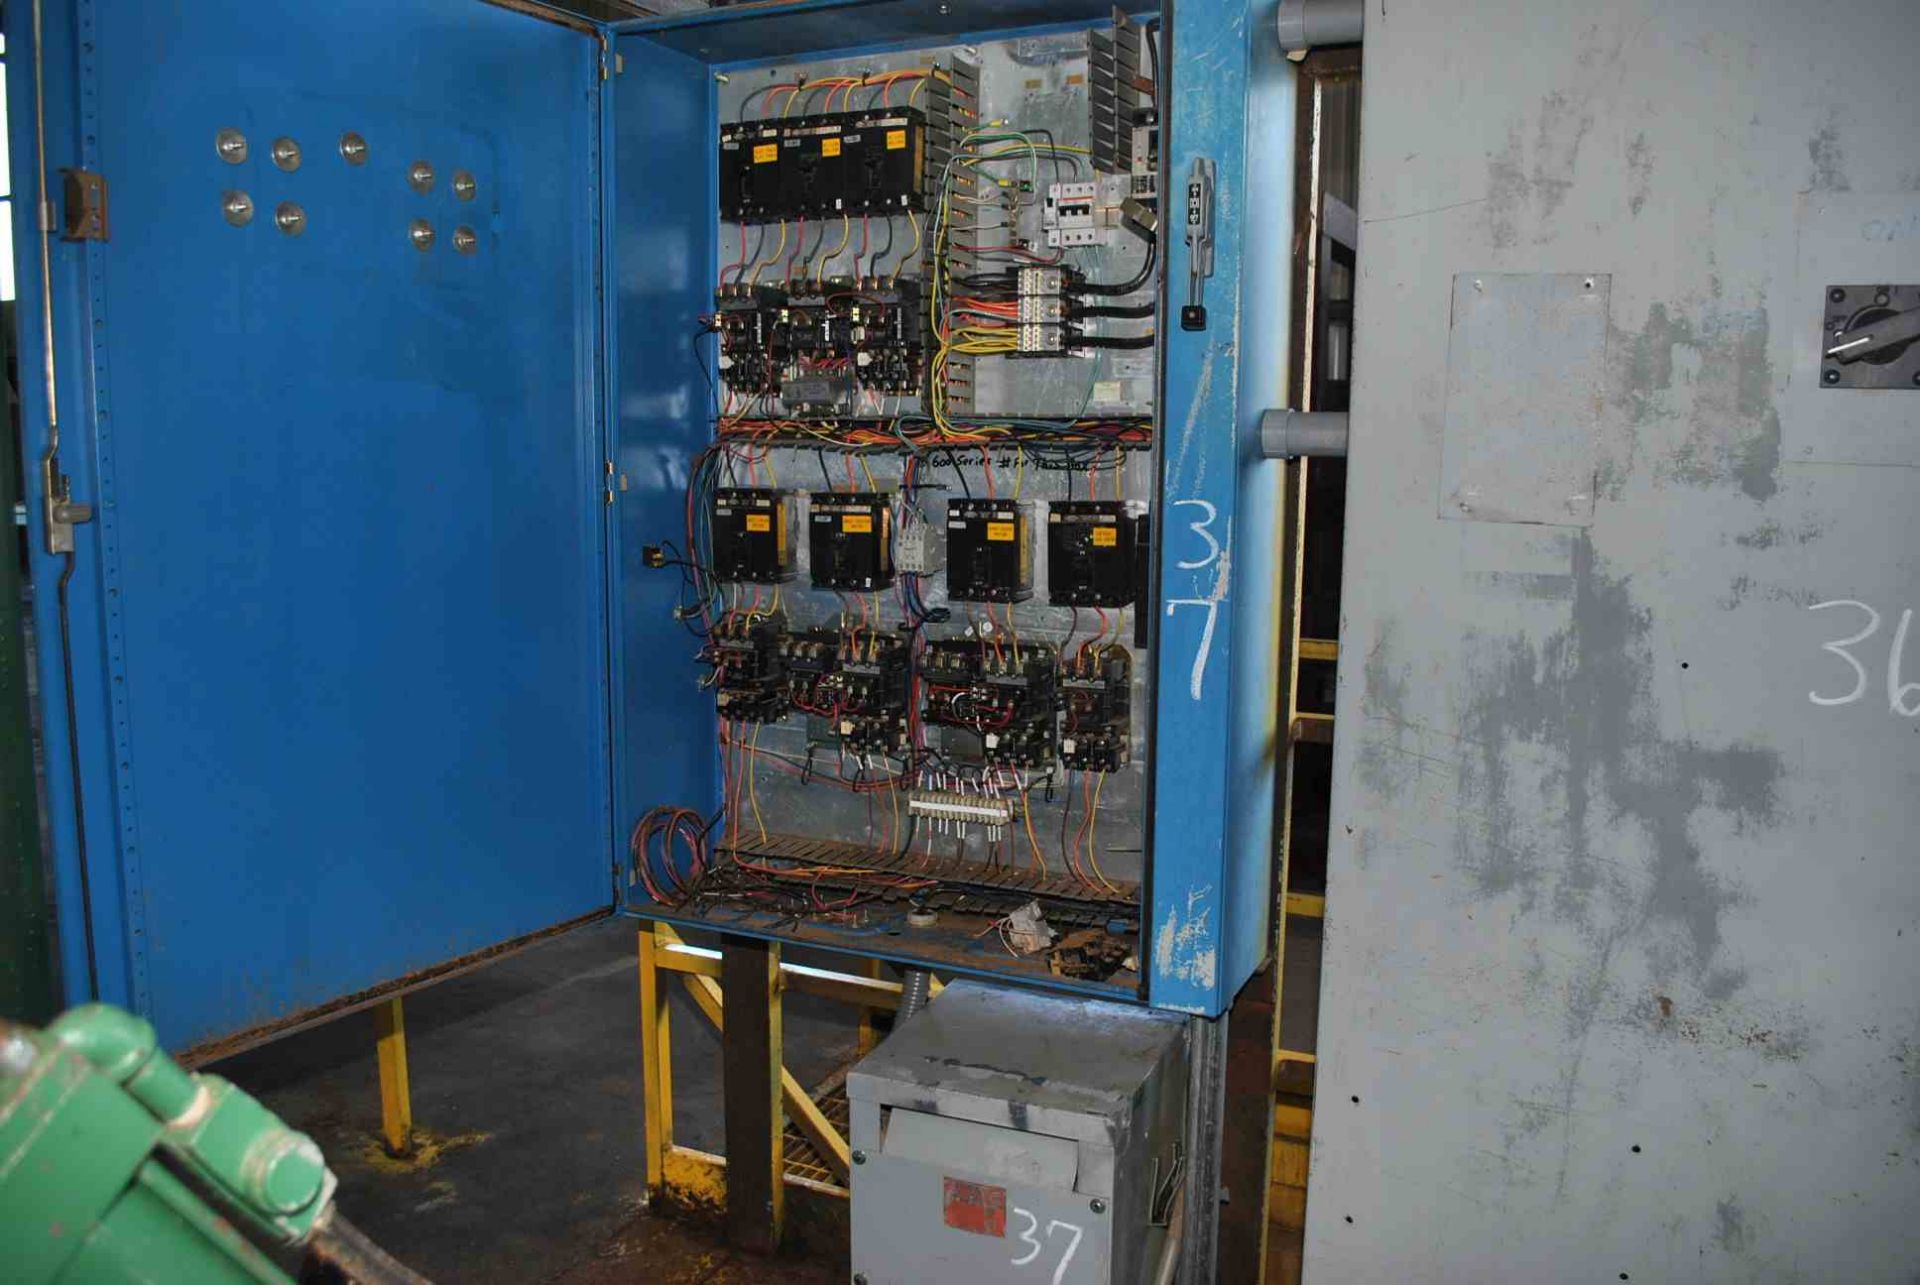 MOTOR CONTROL CENTER W/(7) SIZE 1 STARTERS W/DISCONNECTS; (1) 5 KVA TRANSFORMER